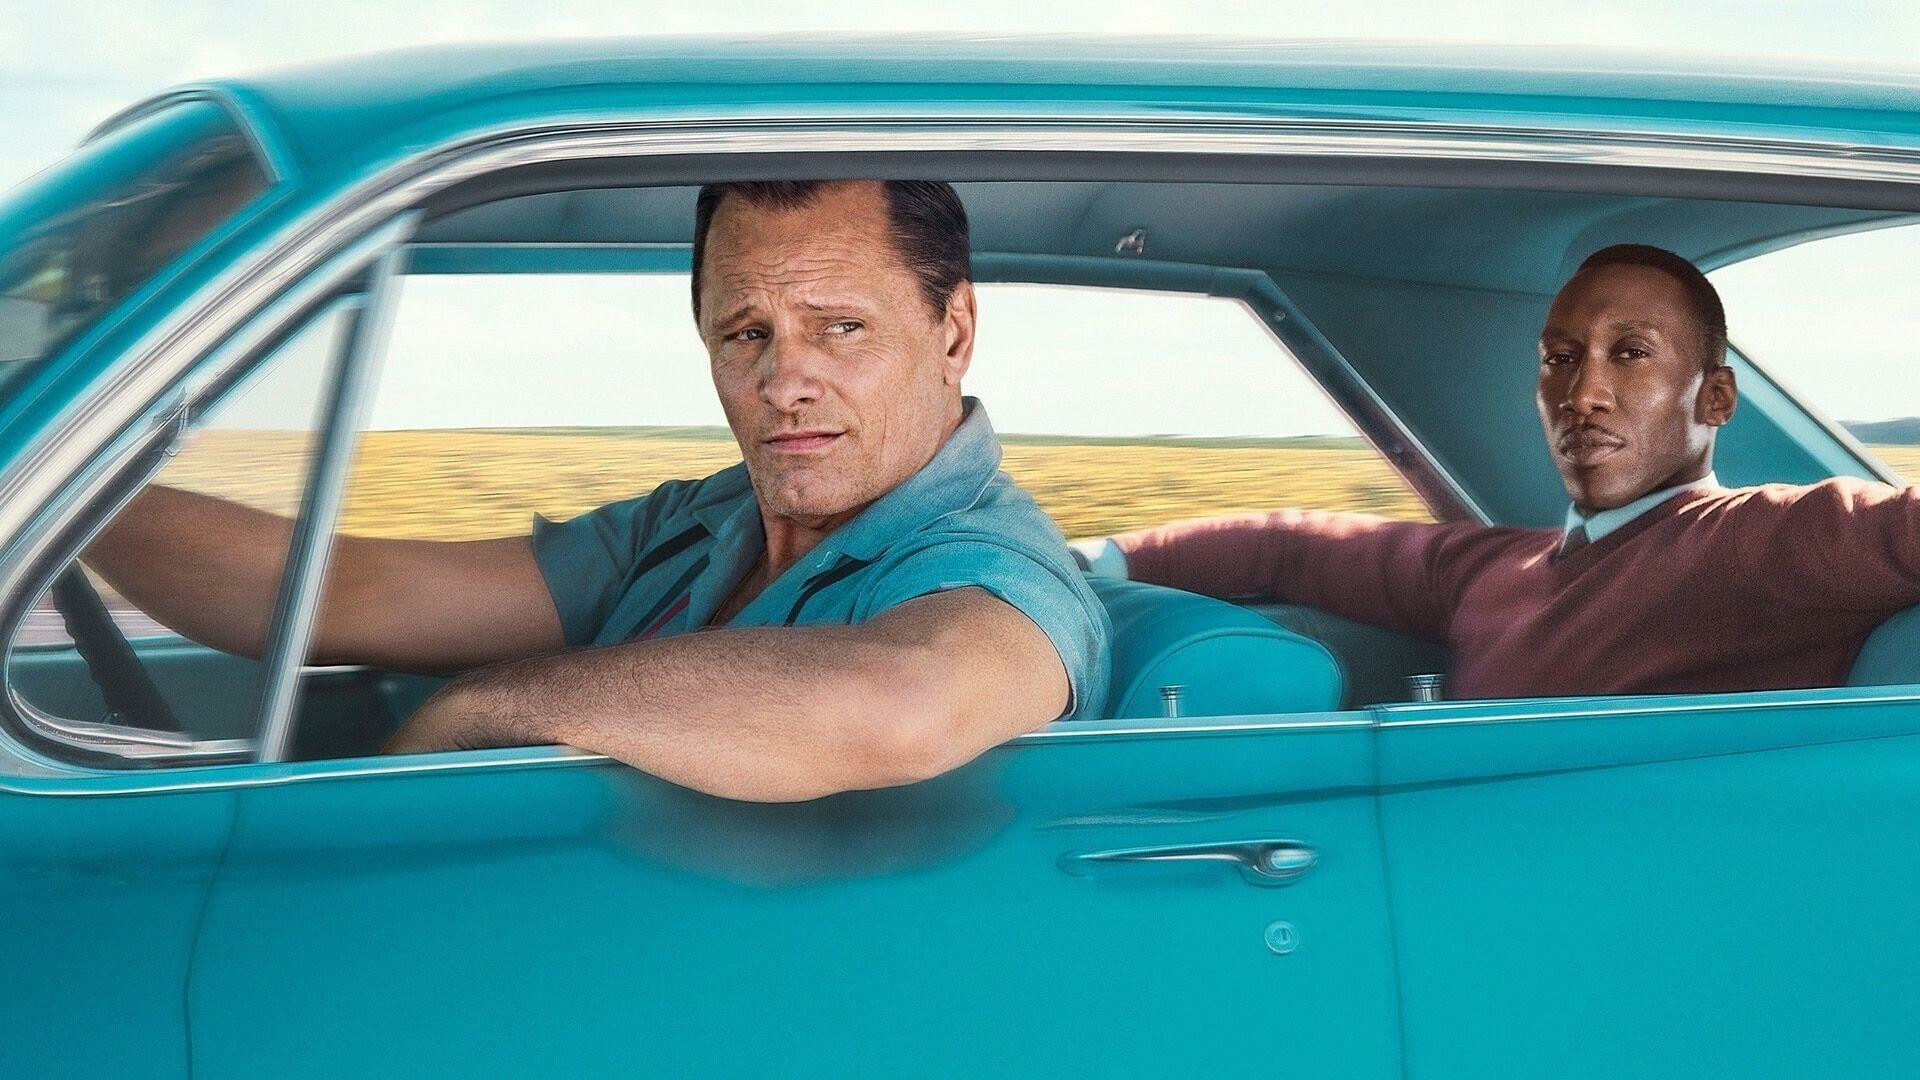 Green Book: The film is inspired by the true story of a 1962 tour of the Deep South by African-American pianist Don Shirley. 1920x1080 Full HD Wallpaper.